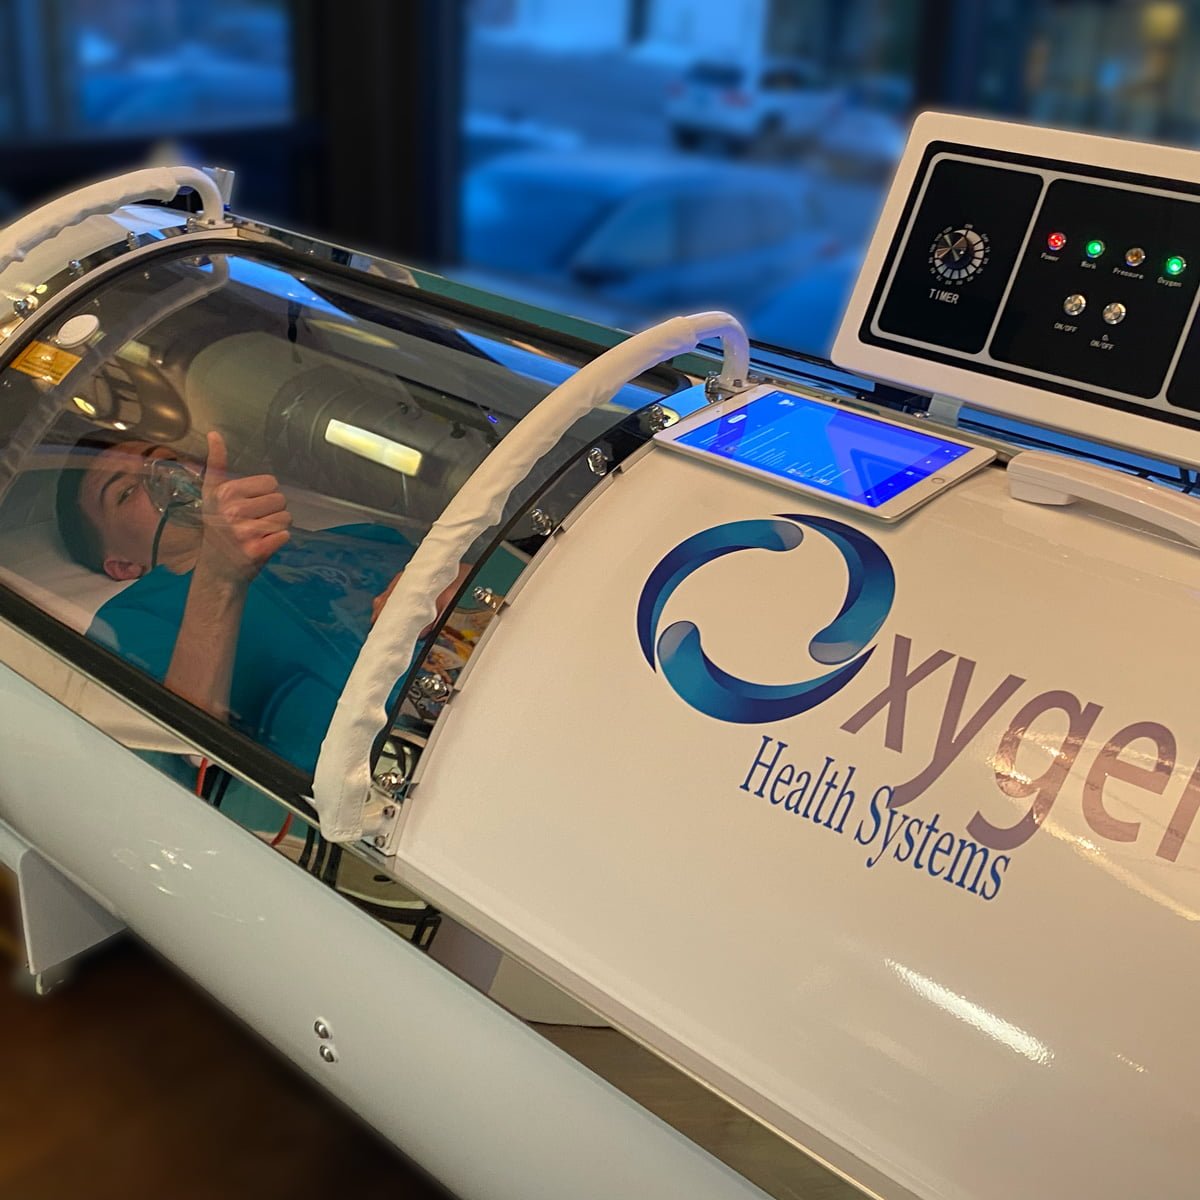 HBOT - Hyperbaric oxygen therapy